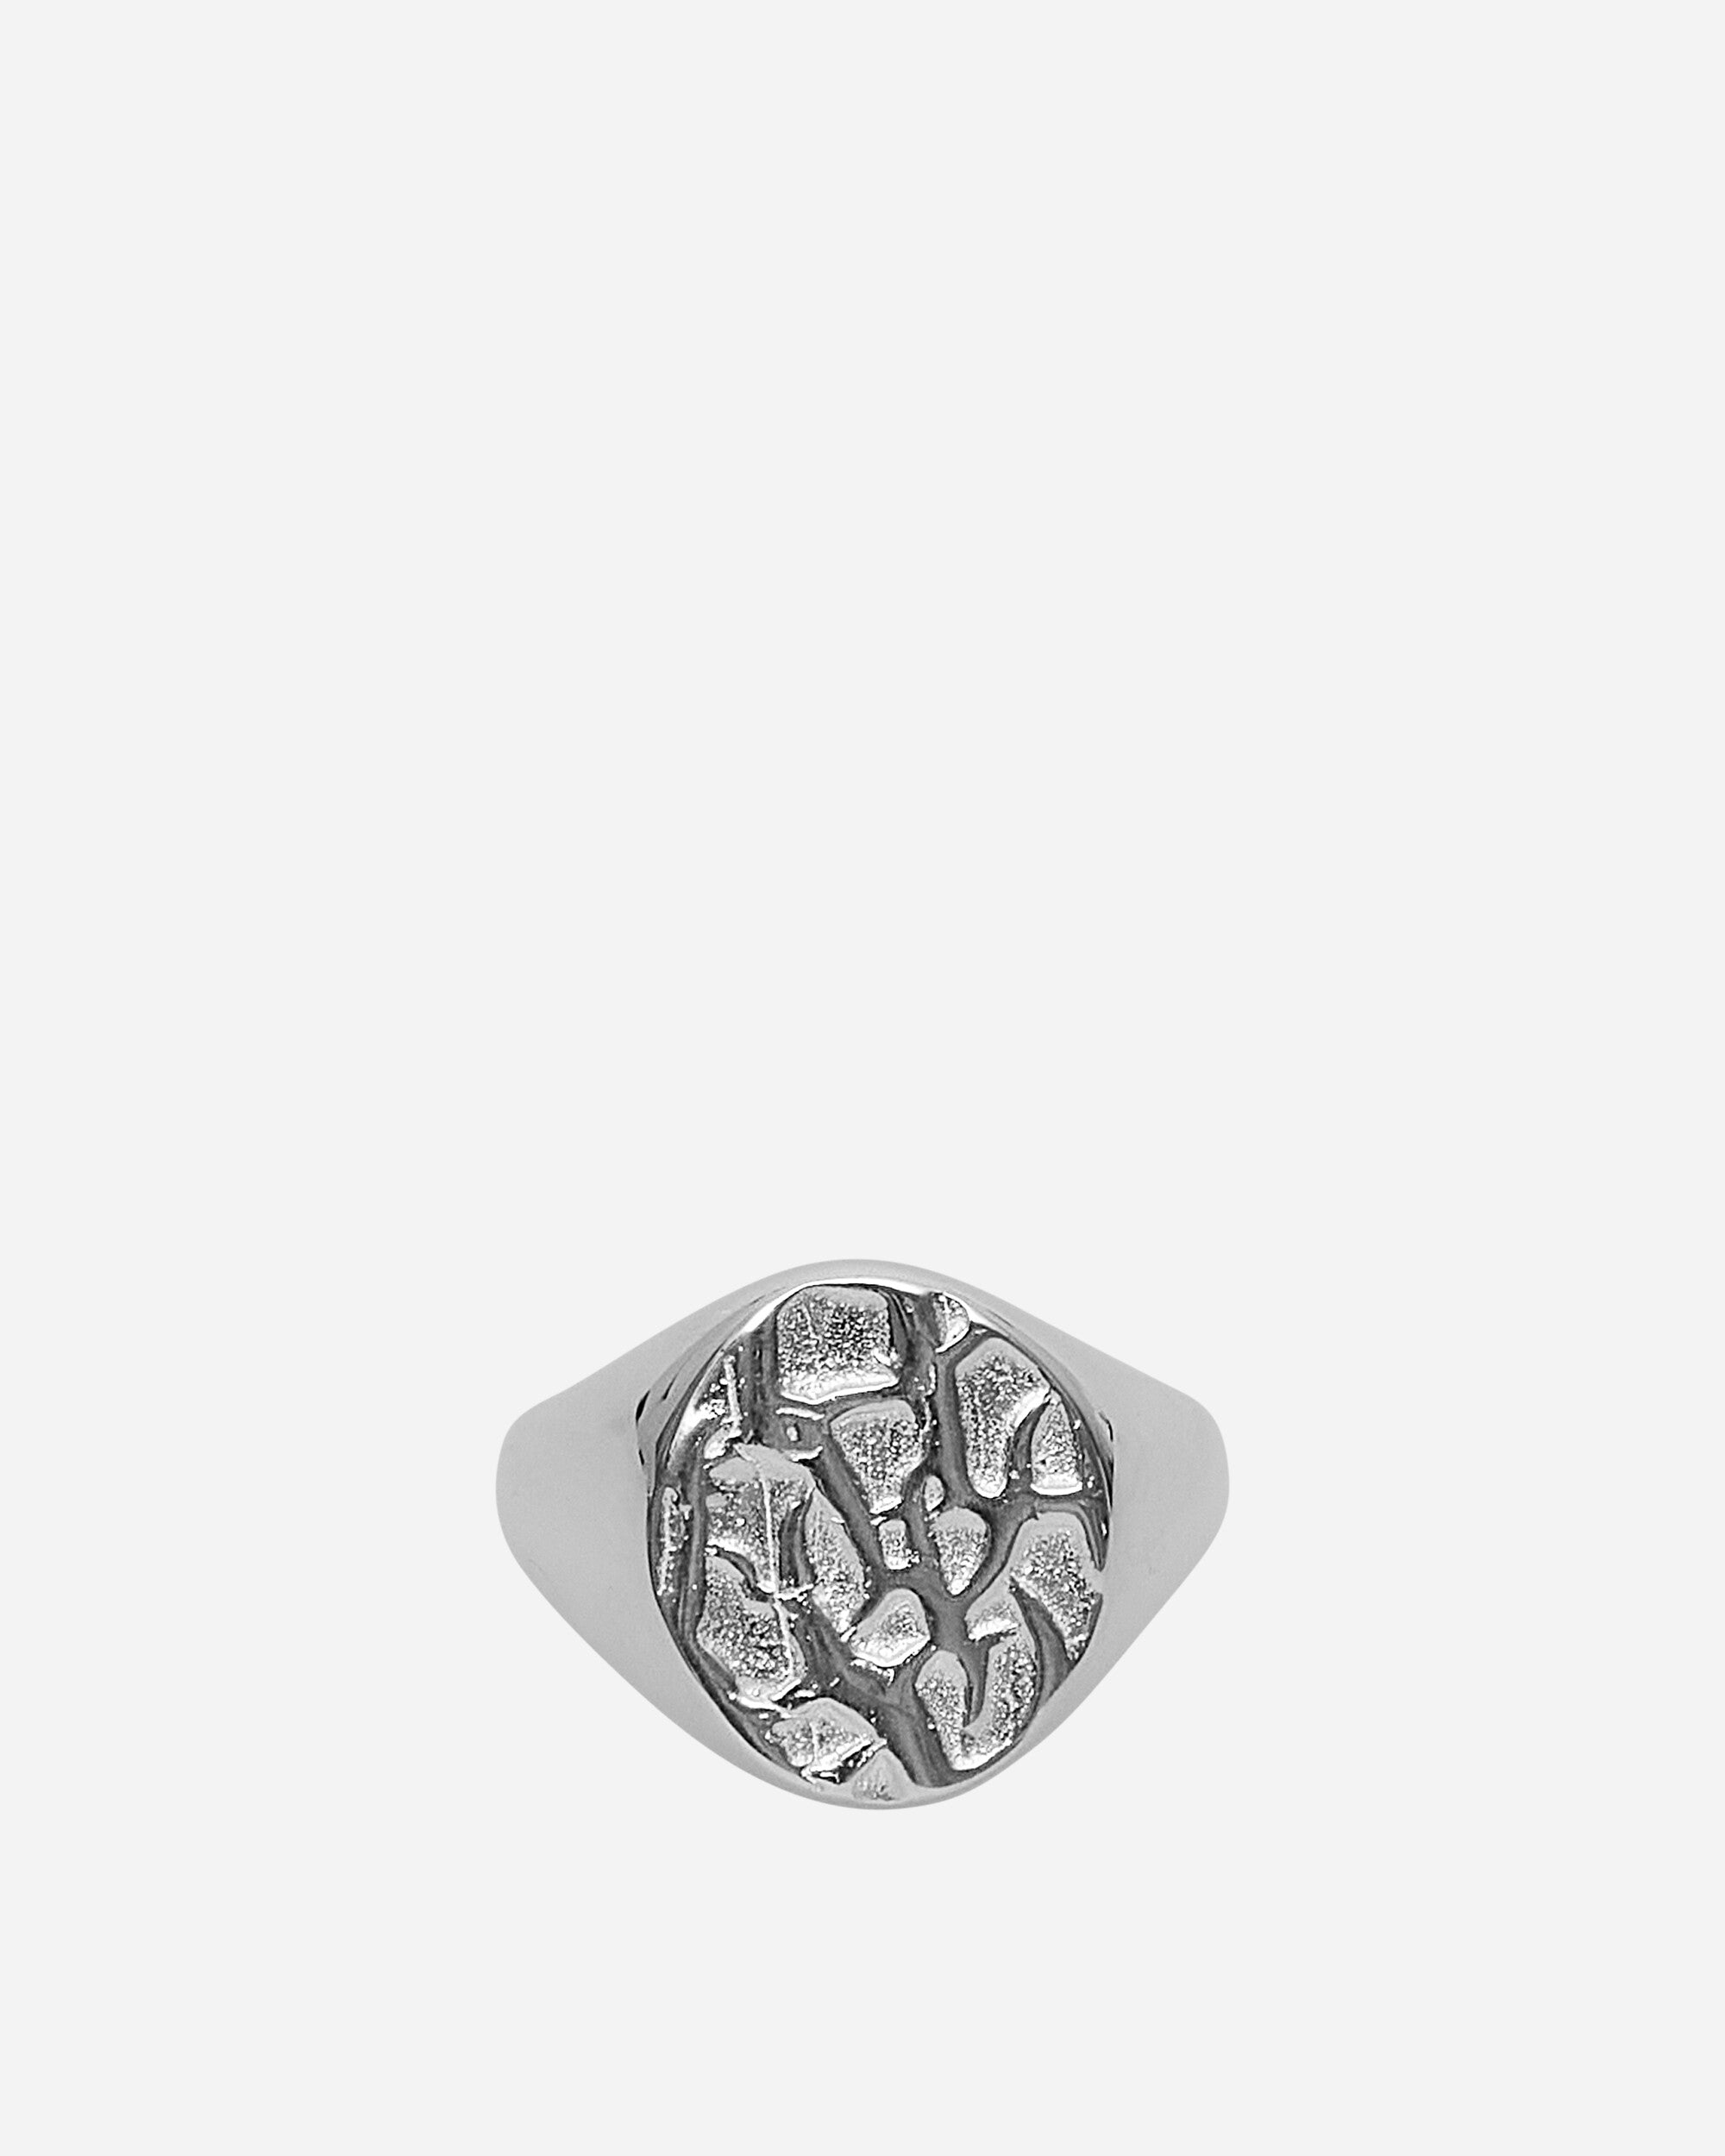 Cracked Melon Signet Ring Silver